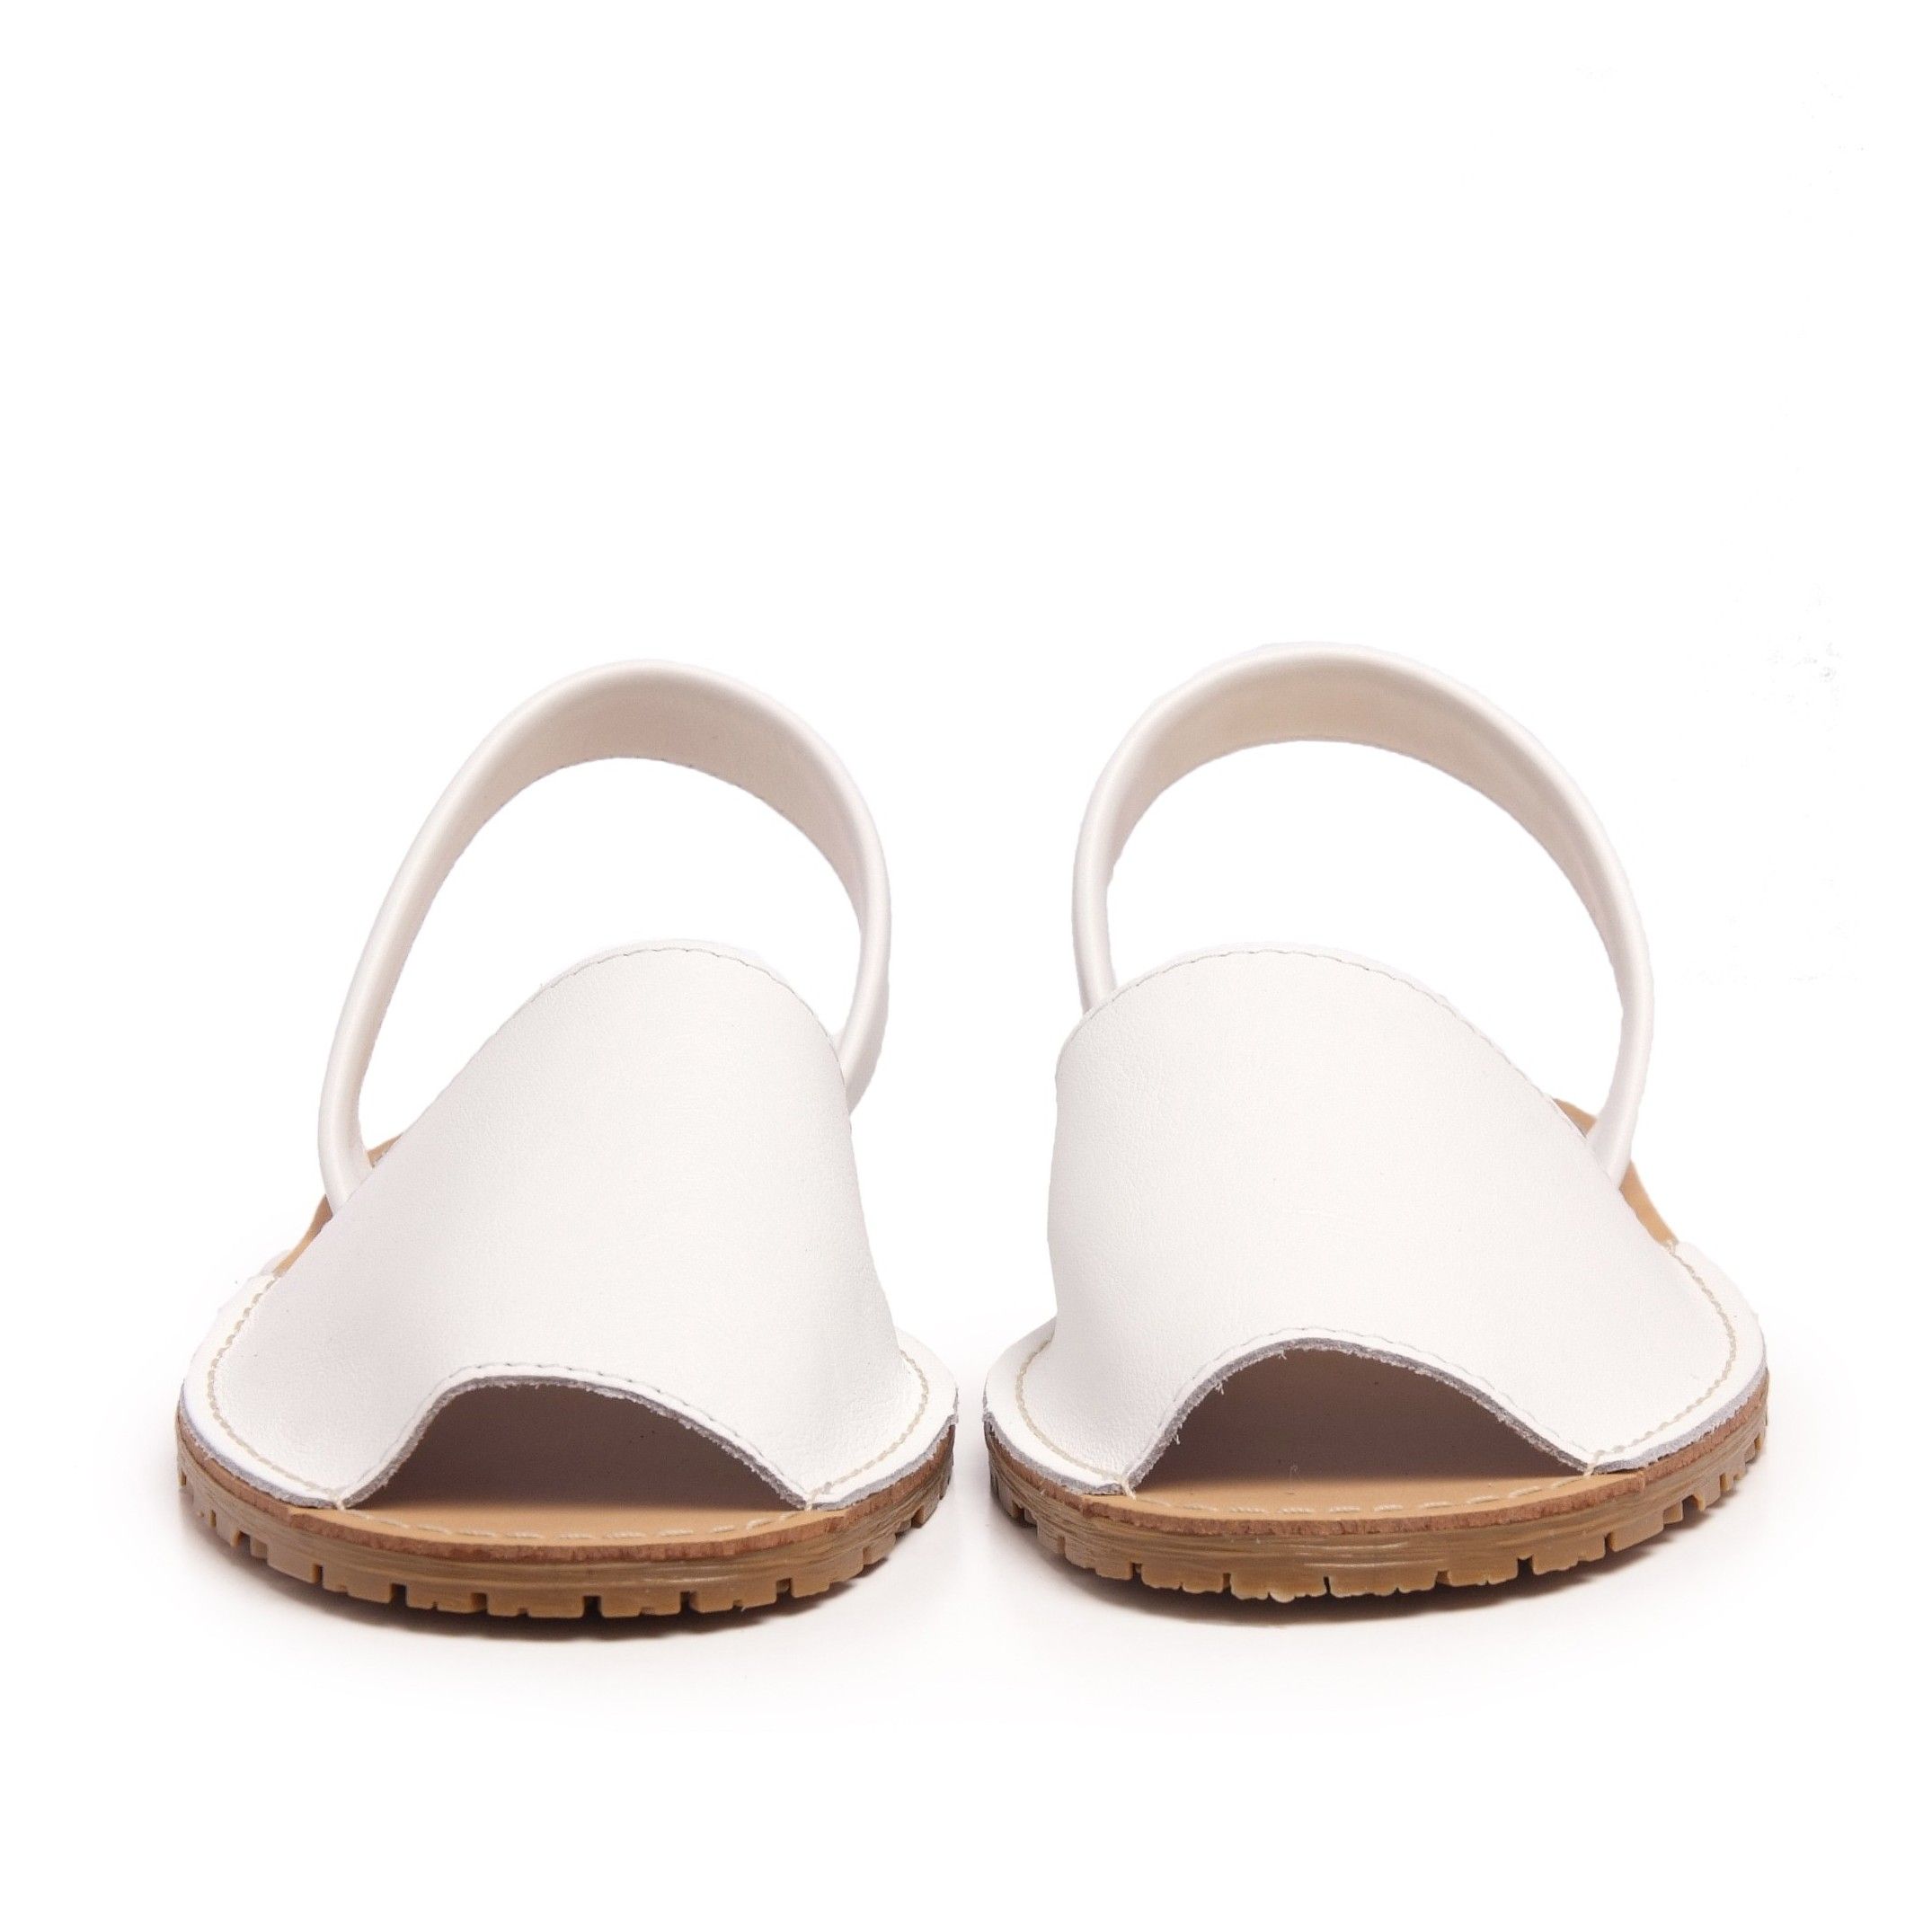 Classic leather sandal Menorquina. Upper and inner: leather. Sole: anti-slip rubber. MADE IN SPAIN